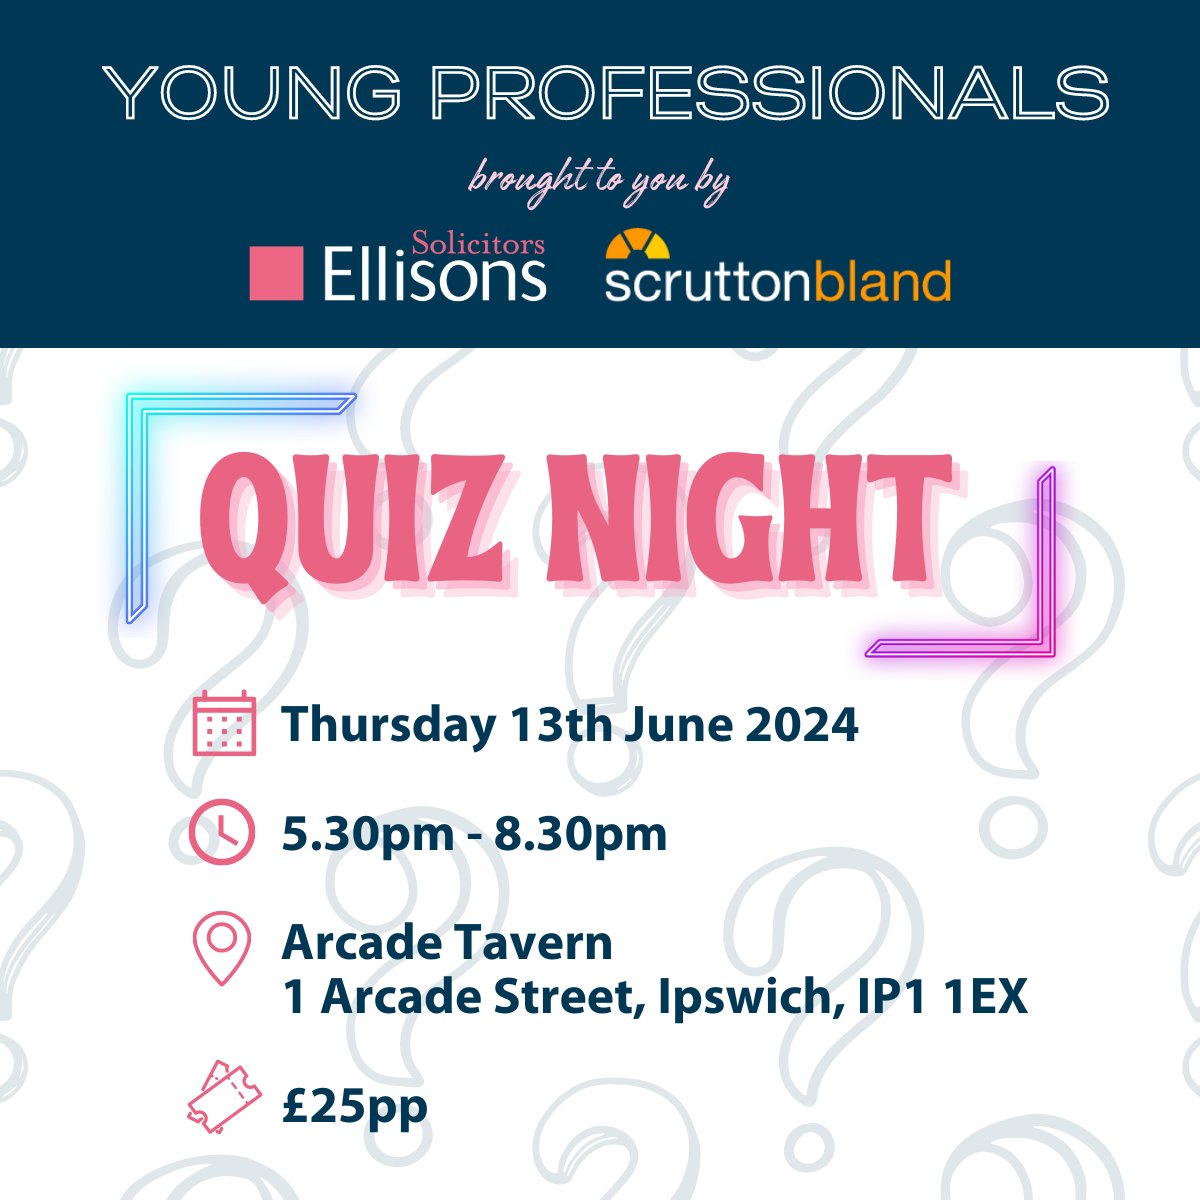 Join us for a competitive quiz night at Arcade Tavern, Ipswich on Thursday 13 June for our next #YoungProfessionals event with @ScruttonBland - the perfect (and fun!) way to start building up your network.

Find out more & book your place👉 eventbrite.co.uk/e/young-profes… #Networking